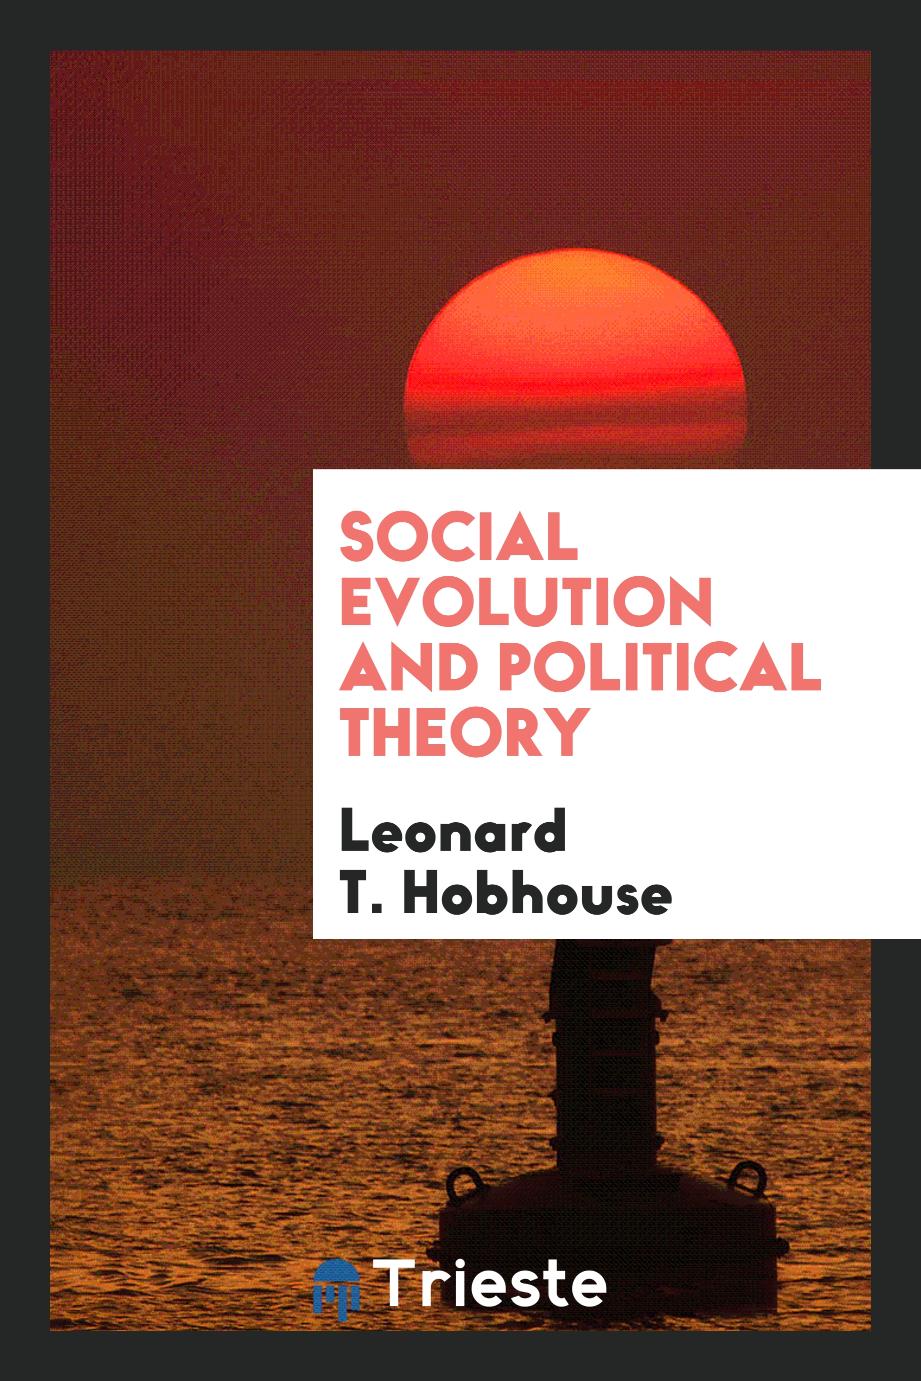 Social evolution and political theory